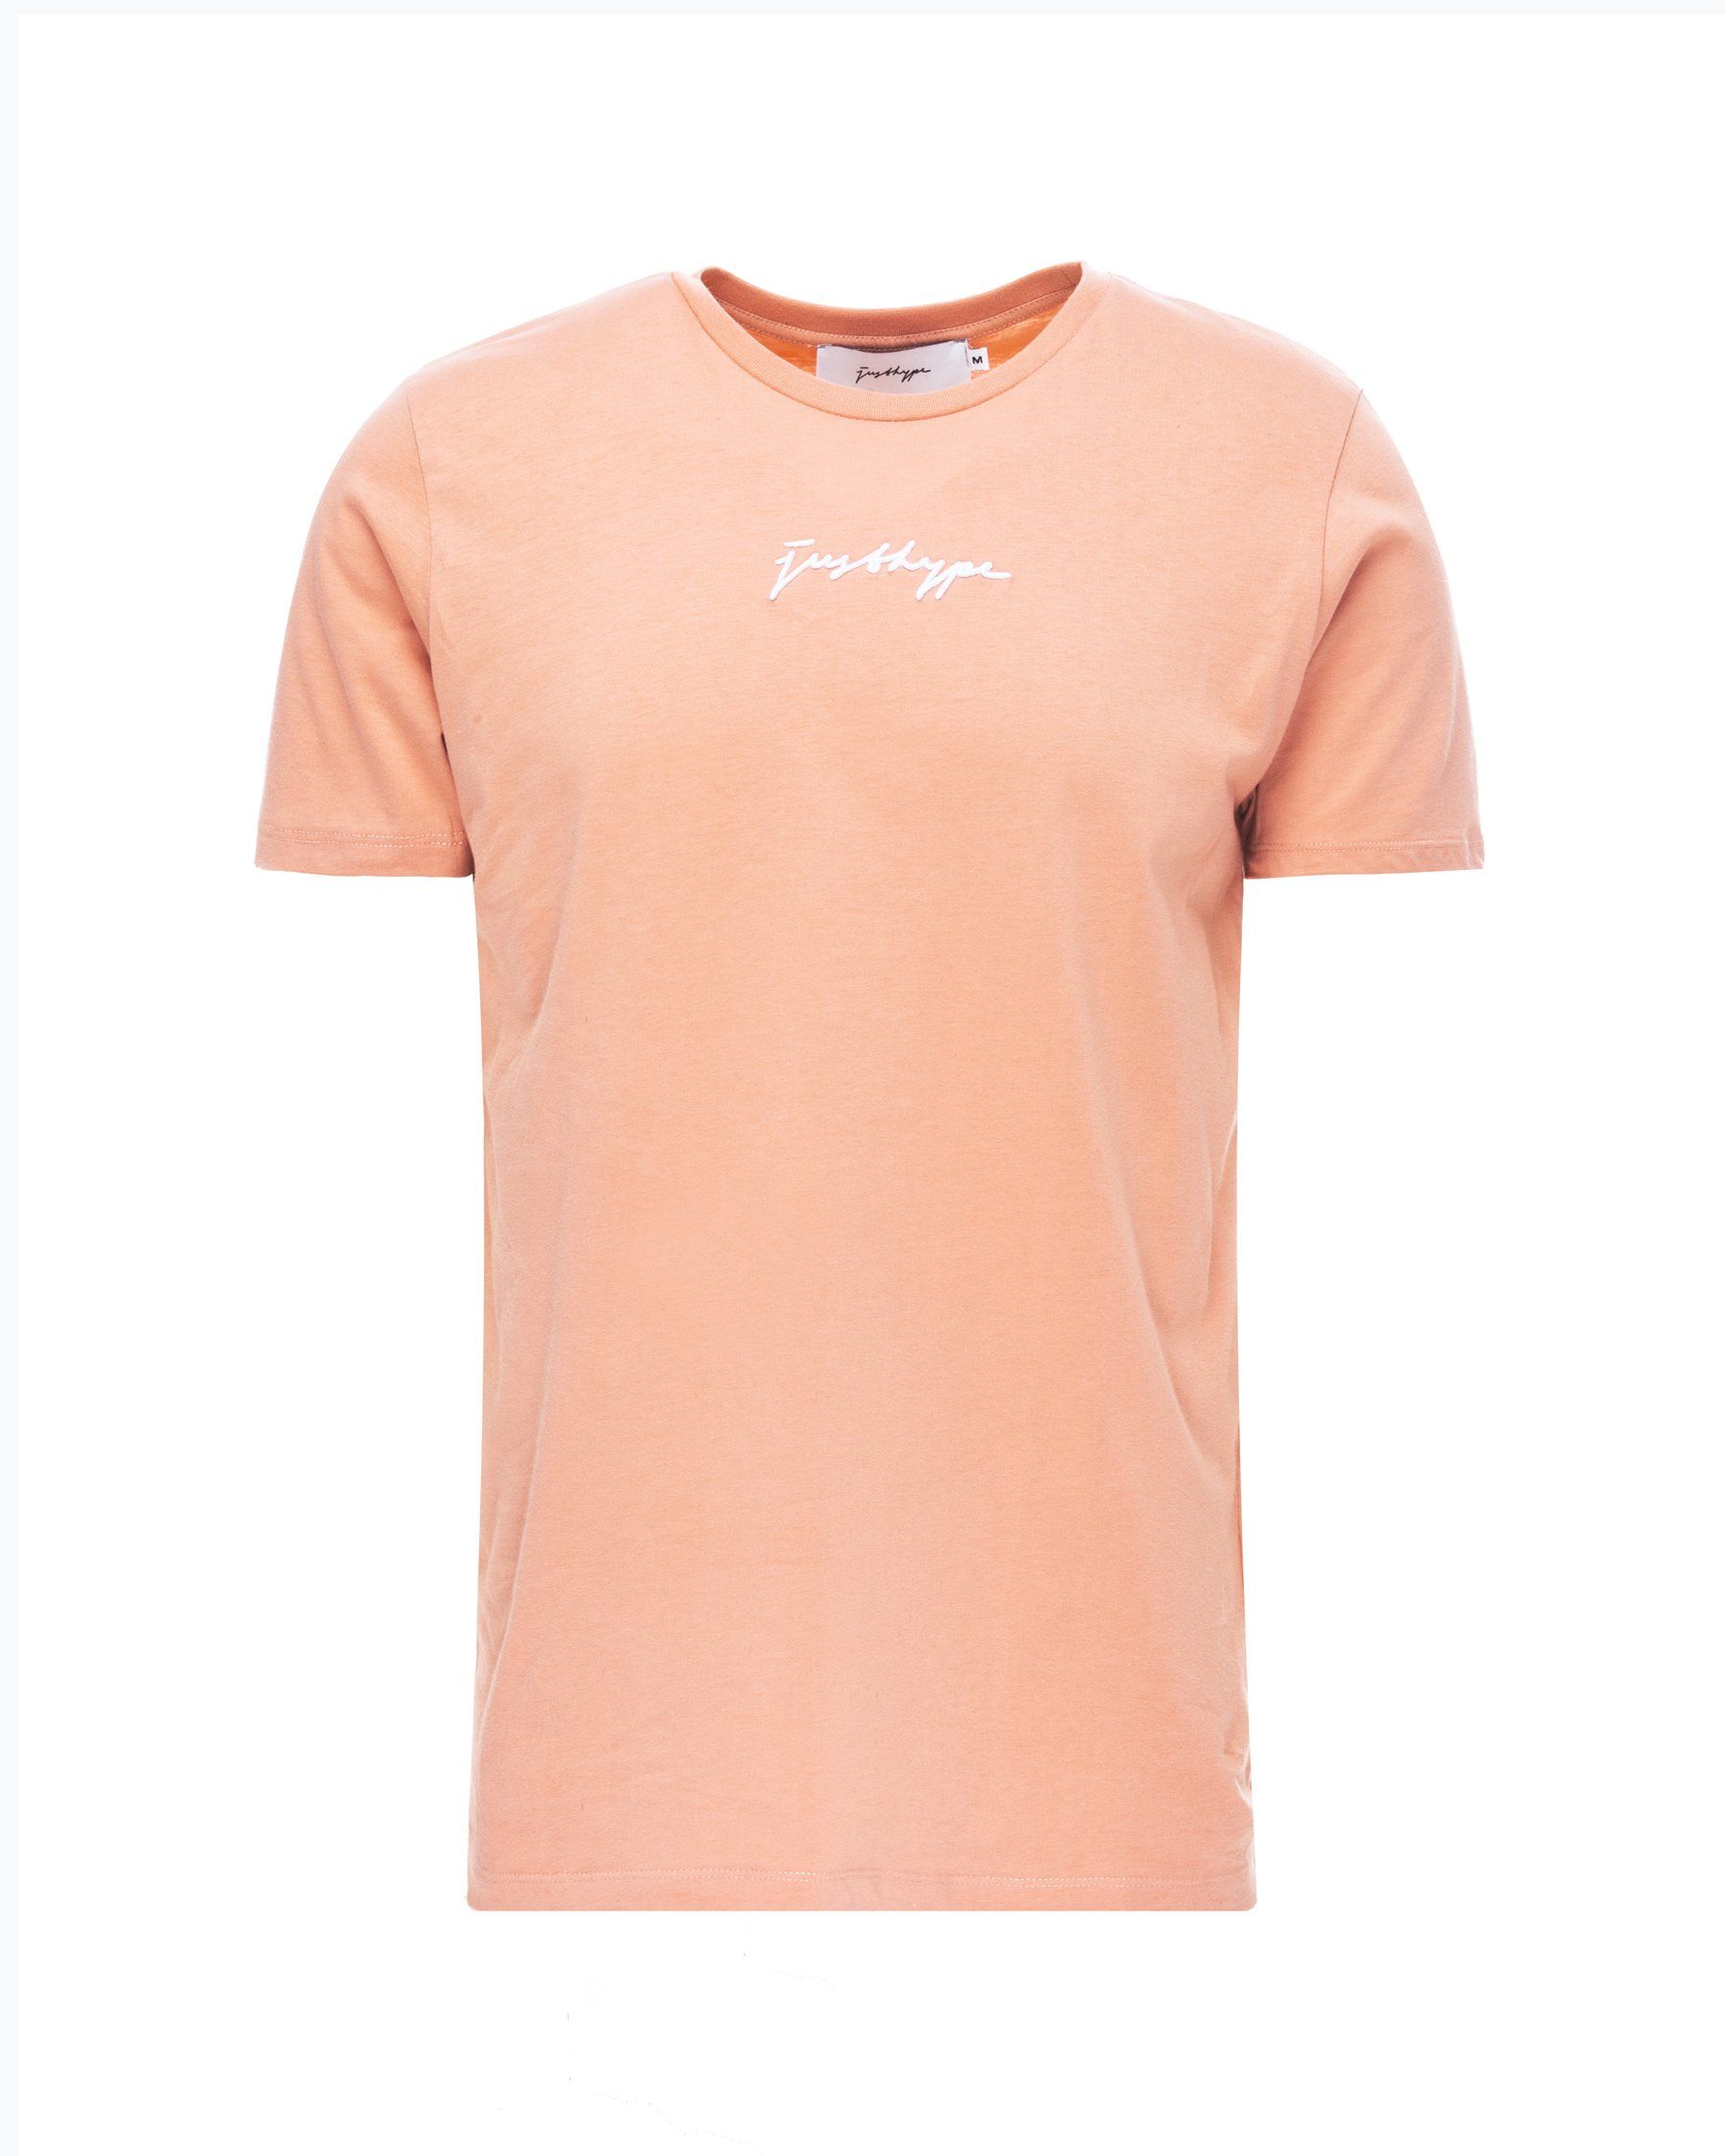 The perfect t-shirt to add to your everyday rotation. The HYPE. Pink Signature Men's T-Shirt is available in a size XXS to XXXL, doubles up as a day to night t-shirt, with supreme amount of comfort with a 100% cotton fabric base. Designed in a pink base and a contrasting white new! justhype signature logo embroidered across the front. Wear with skinny fit jeans and box fresh jeans or keep it casual with a pair of dark wash denim shorts for beach days. Machine washable.